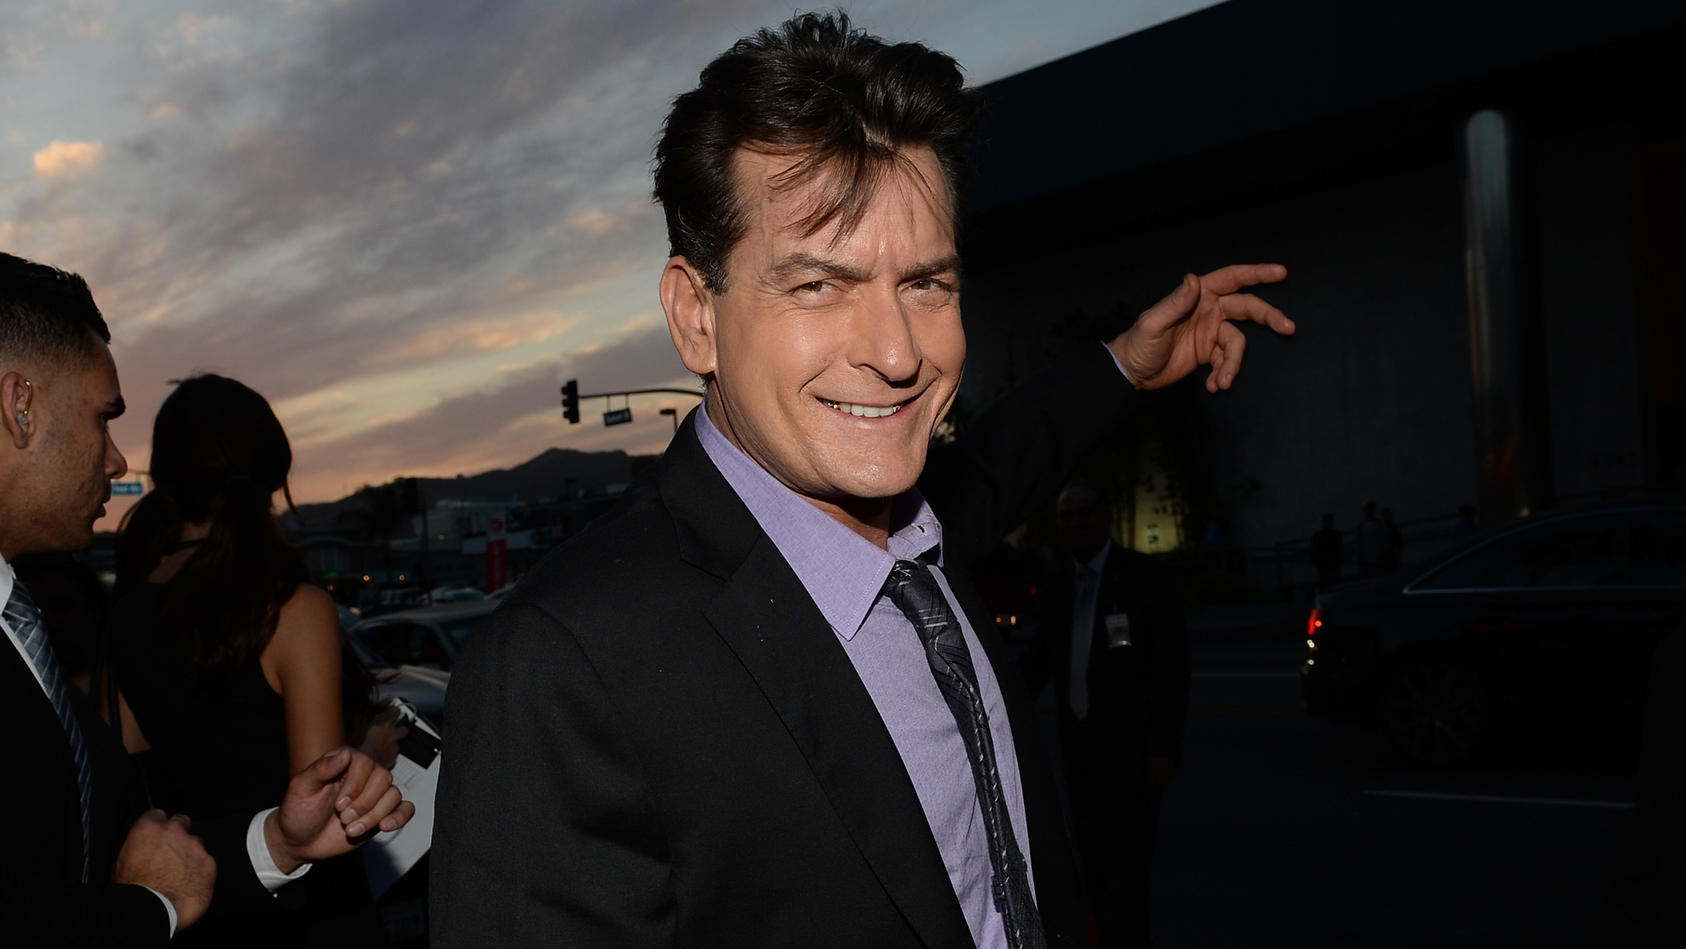 HOLLYWOOD, CA - APRIL 11:  Actor Charlie Sheen arrives for the premiere of Dimension Films' 'Scary Movie 5' at ArcLight Cinemas Cinerama Dome on April 11, 2013 in Hollywood, California.  (Photo by Michael Buckner/Getty Images)